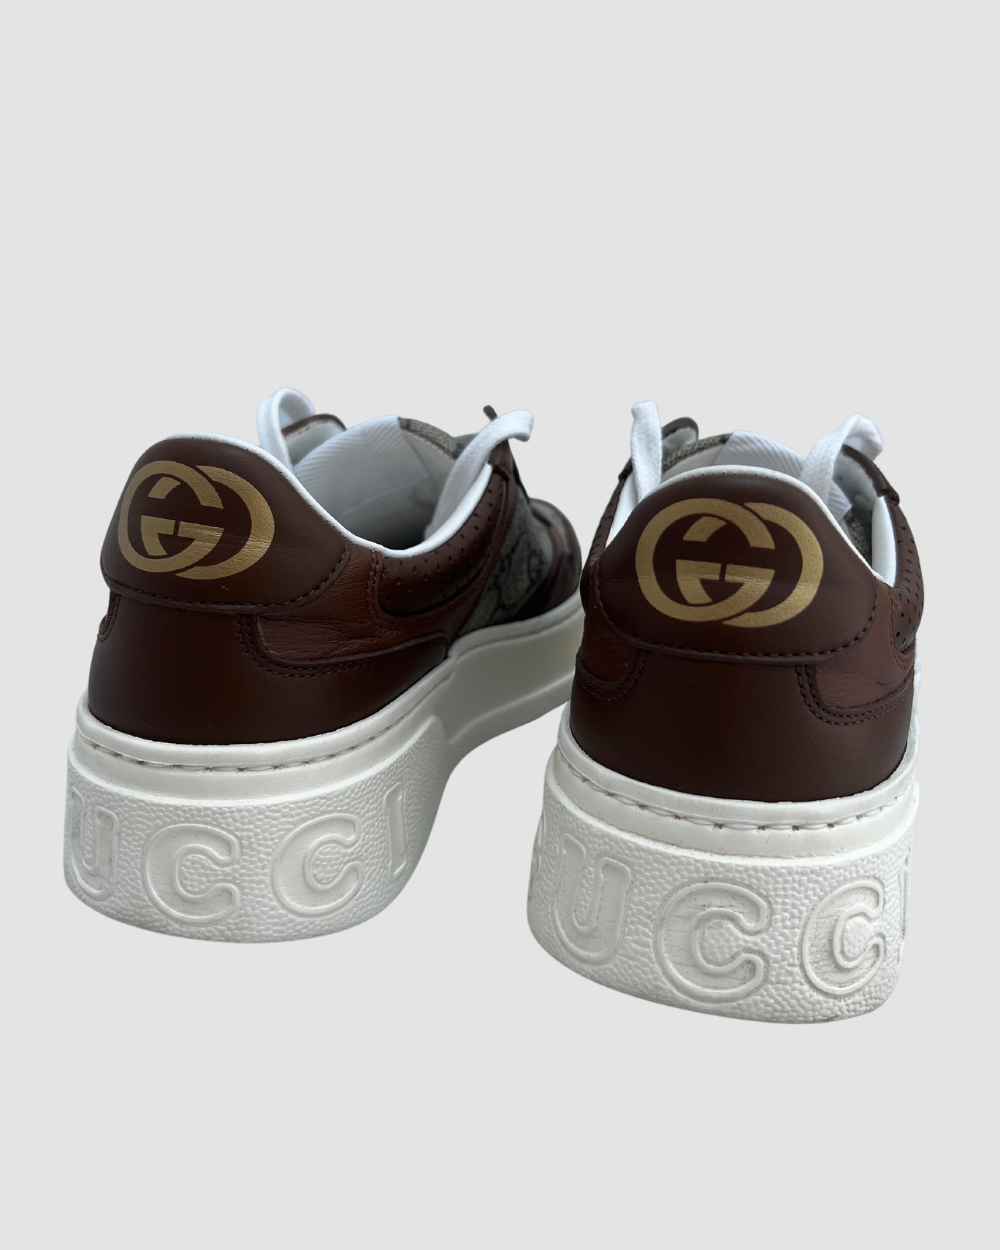 Gucci GG Canvas Leather Sneaker, 37